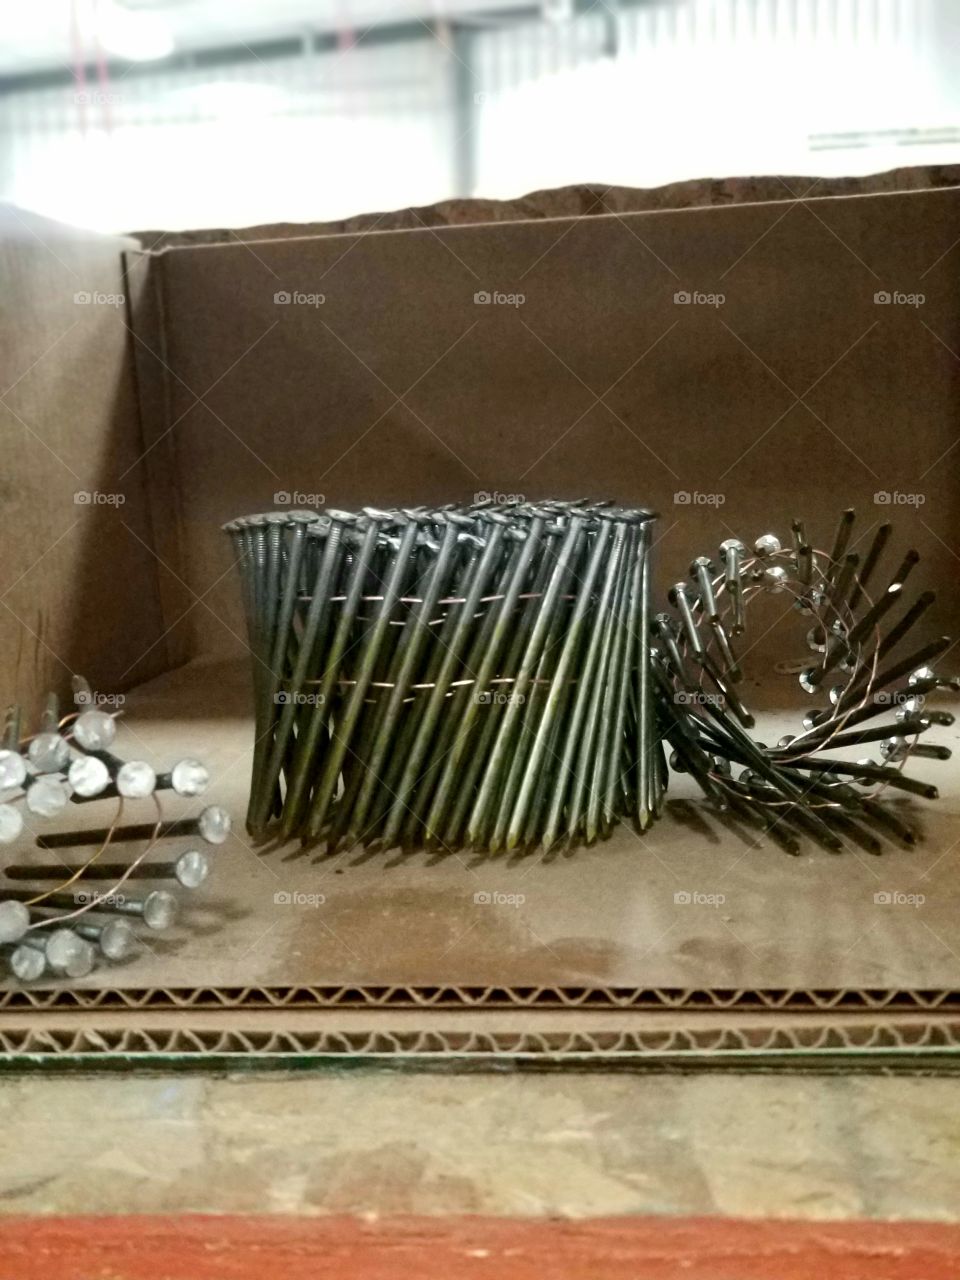 Roll of nails in a box.